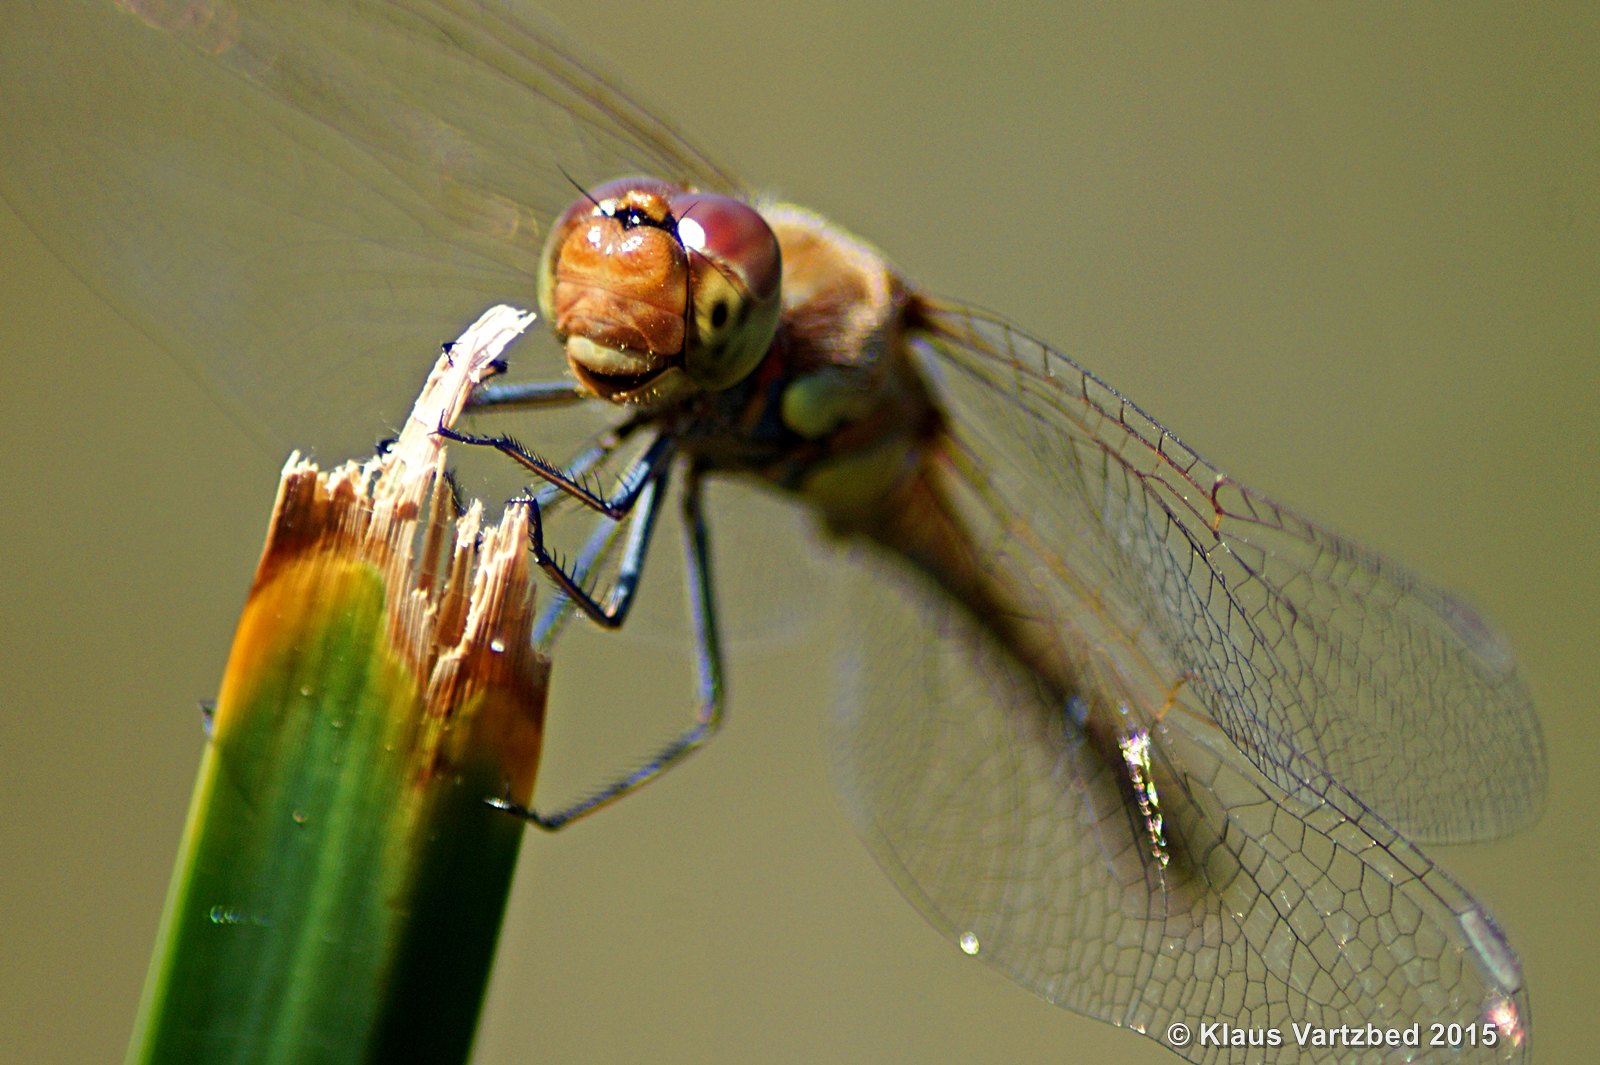 Dragonfly Smile